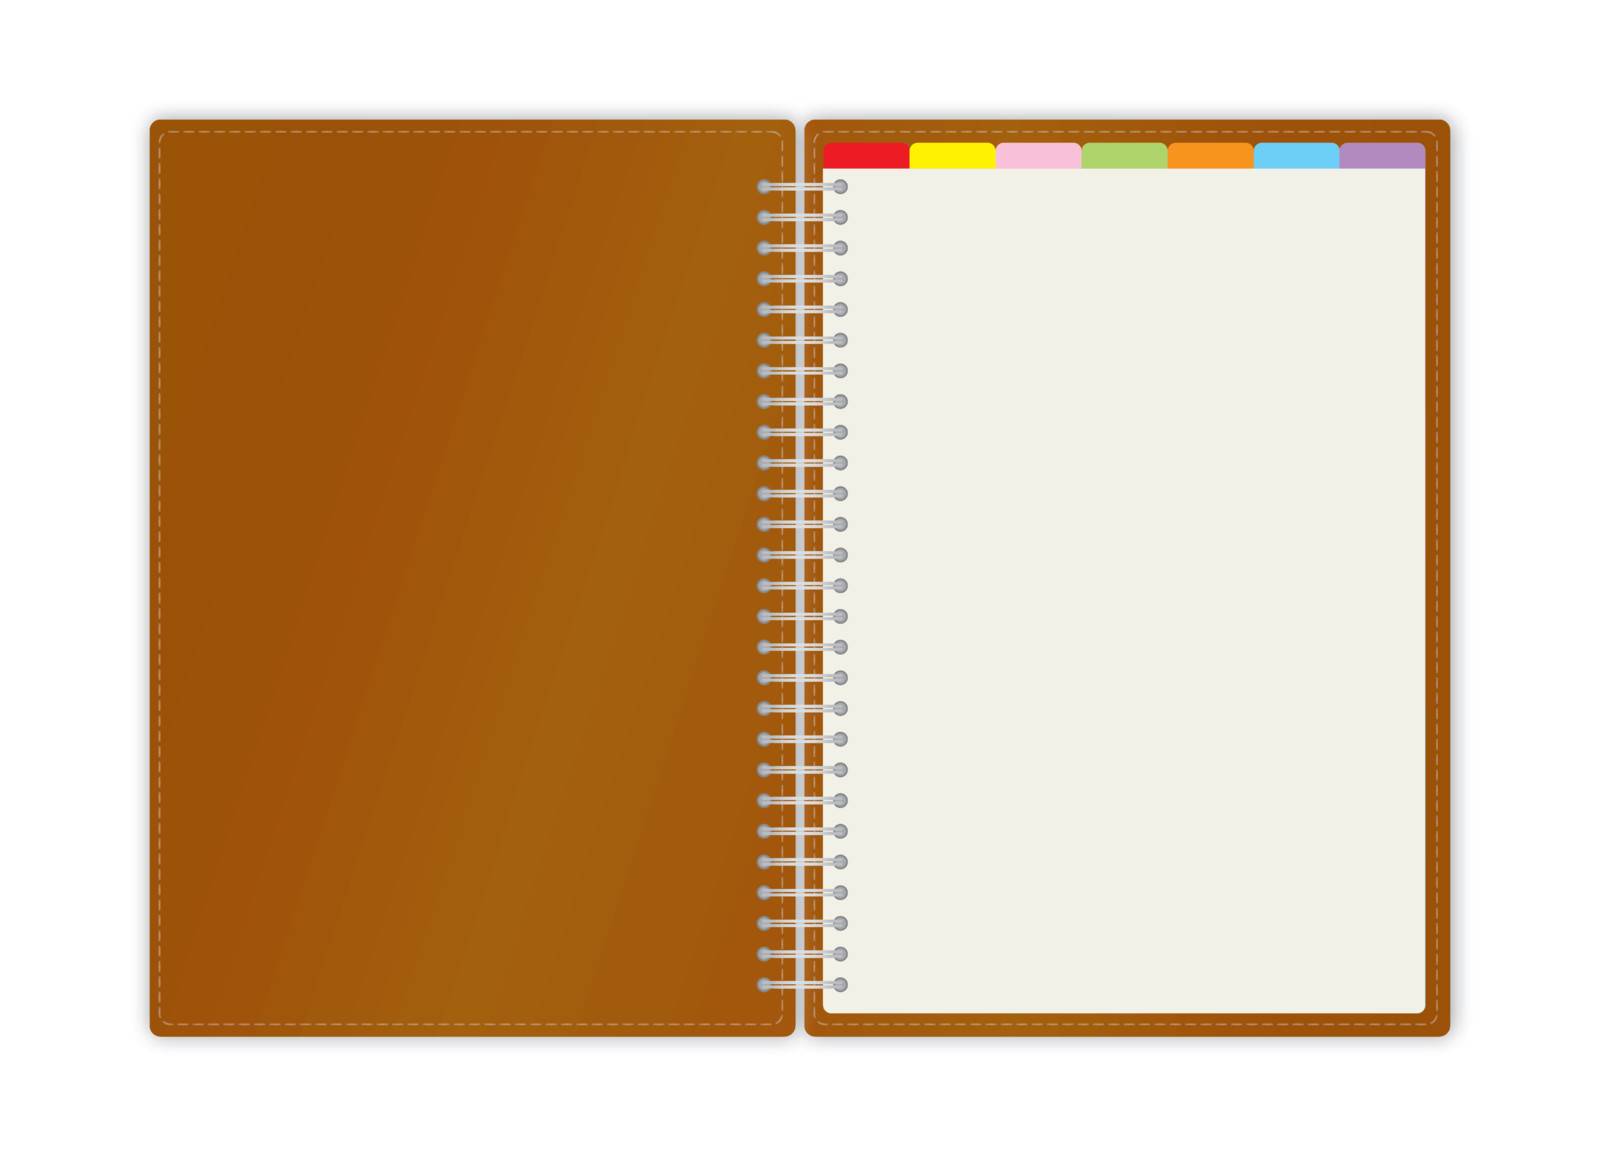 Weekly business project planner book on white background